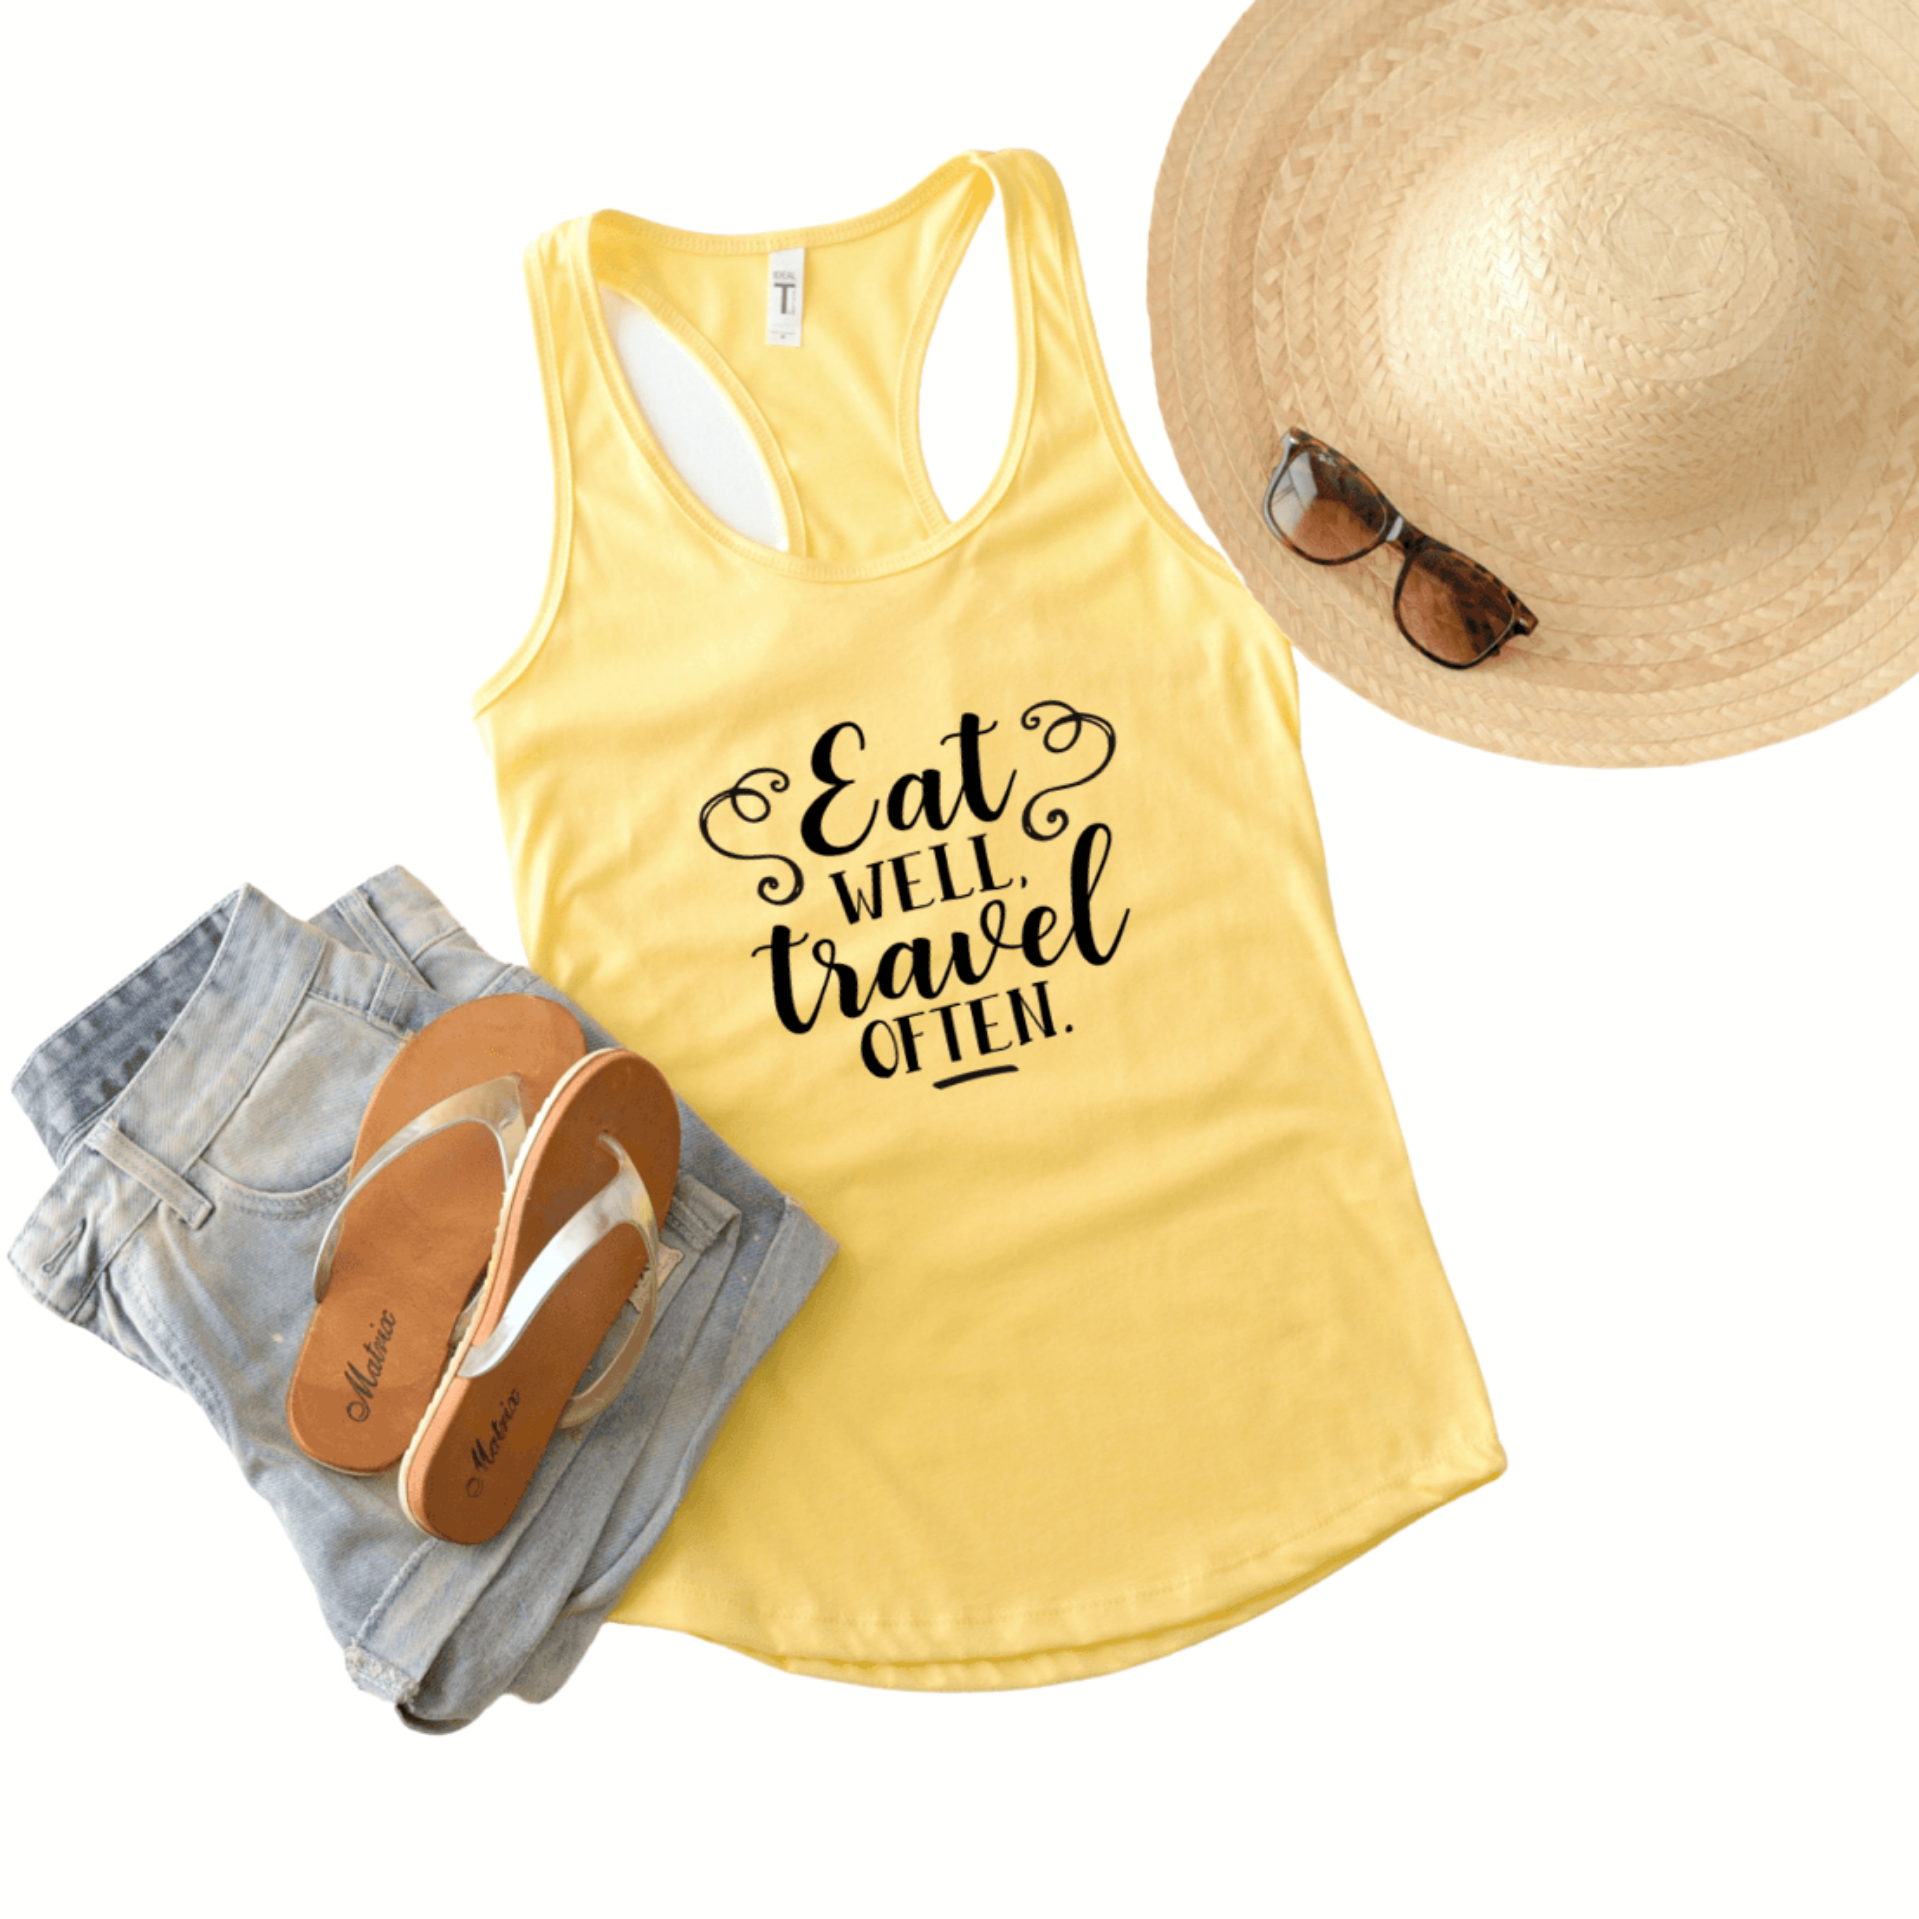 Eat well, travel often in black lettering on a banana (yellow) Next Level 1533 tank top.